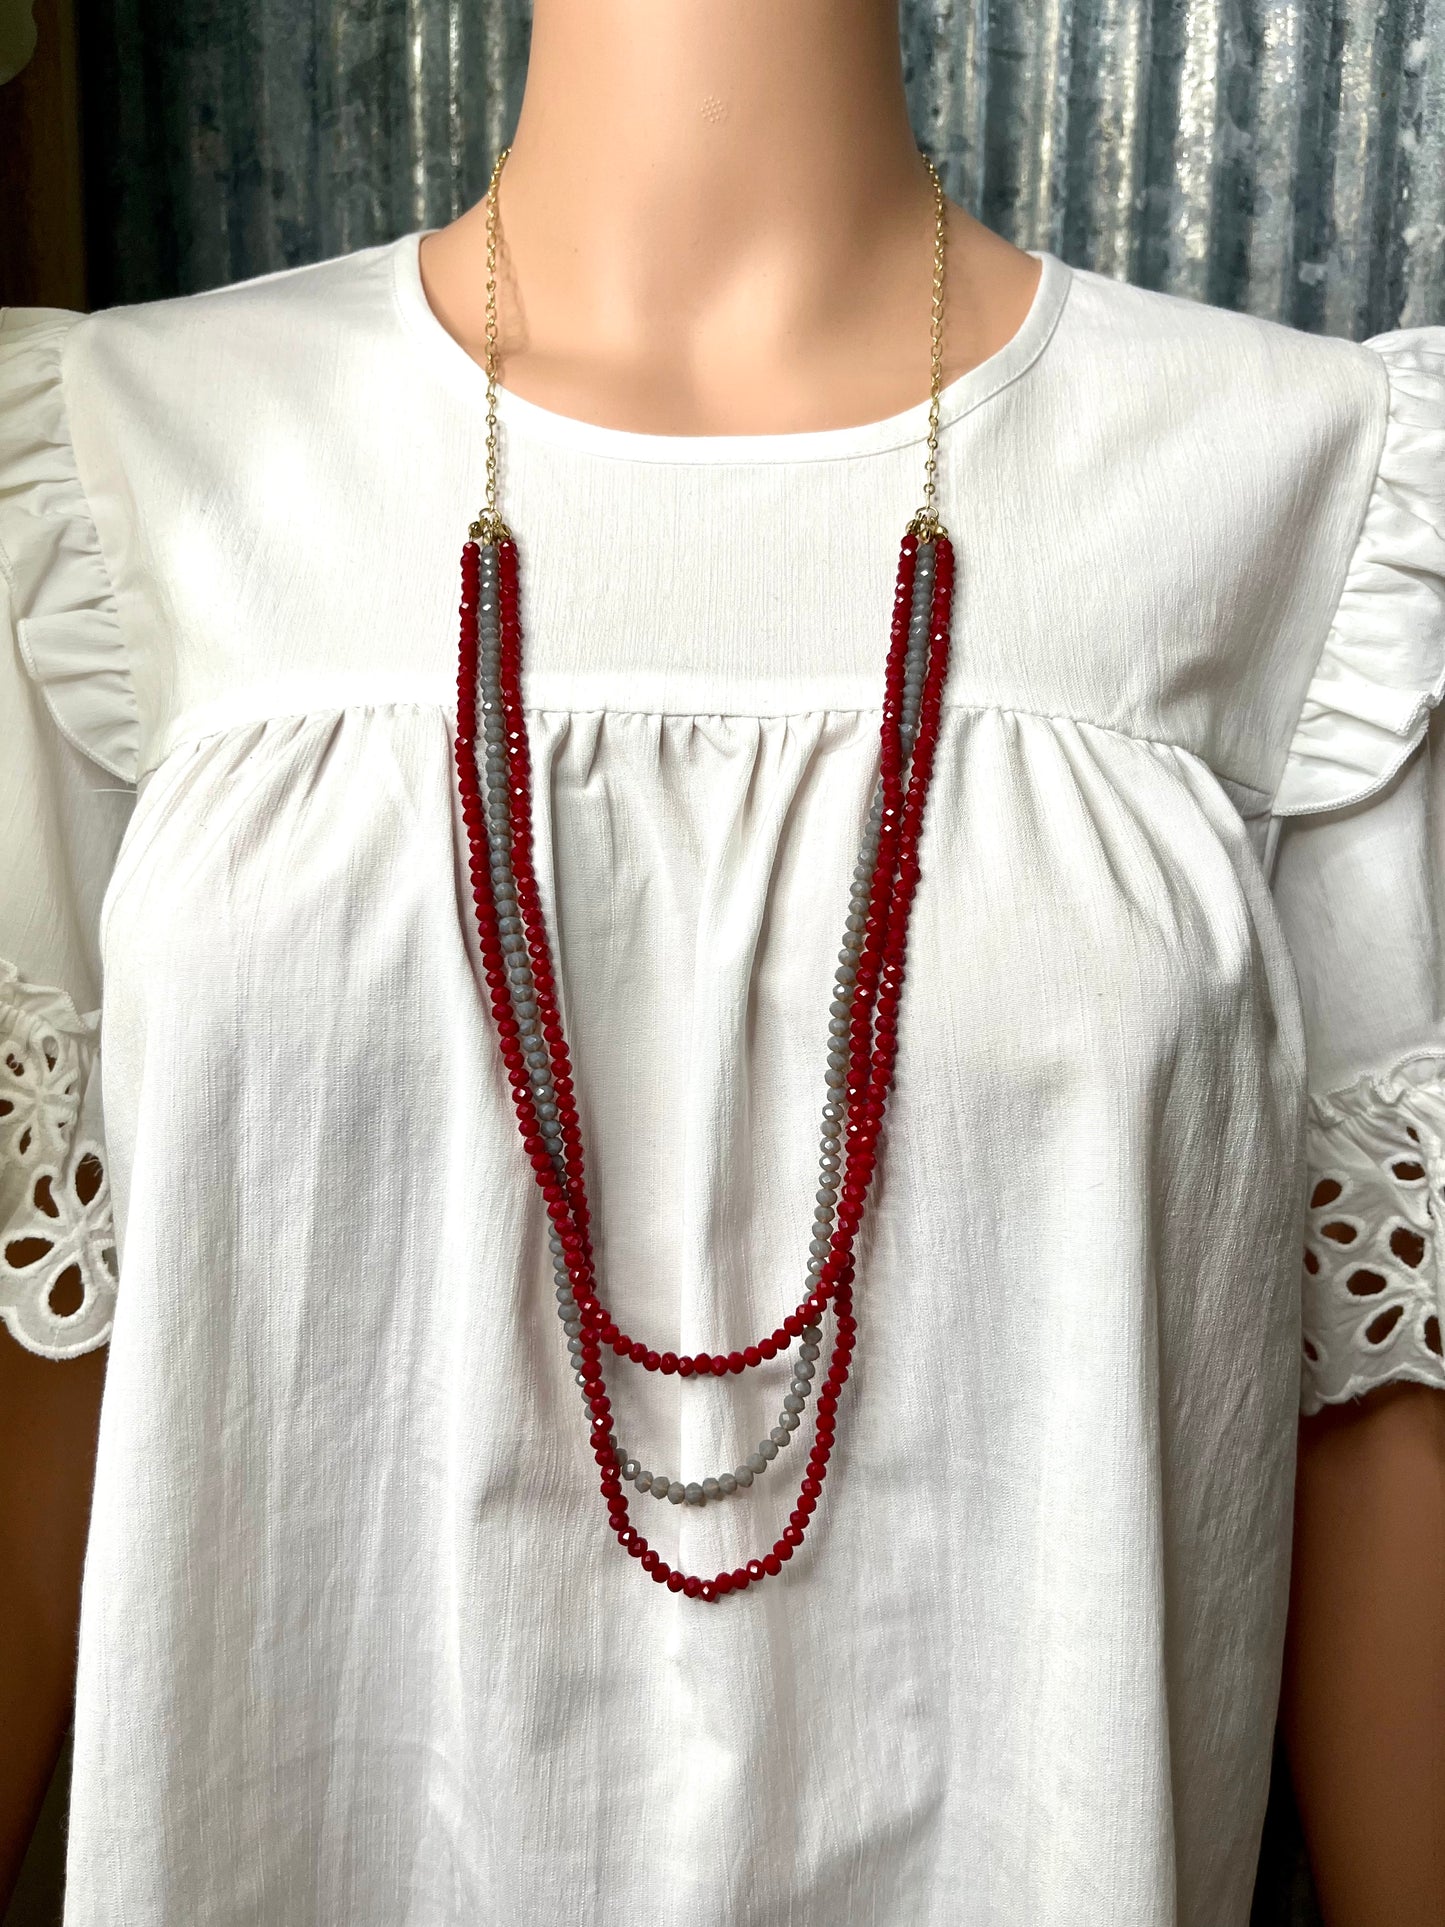 Grey & Dark Red Beaded Layered Necklace